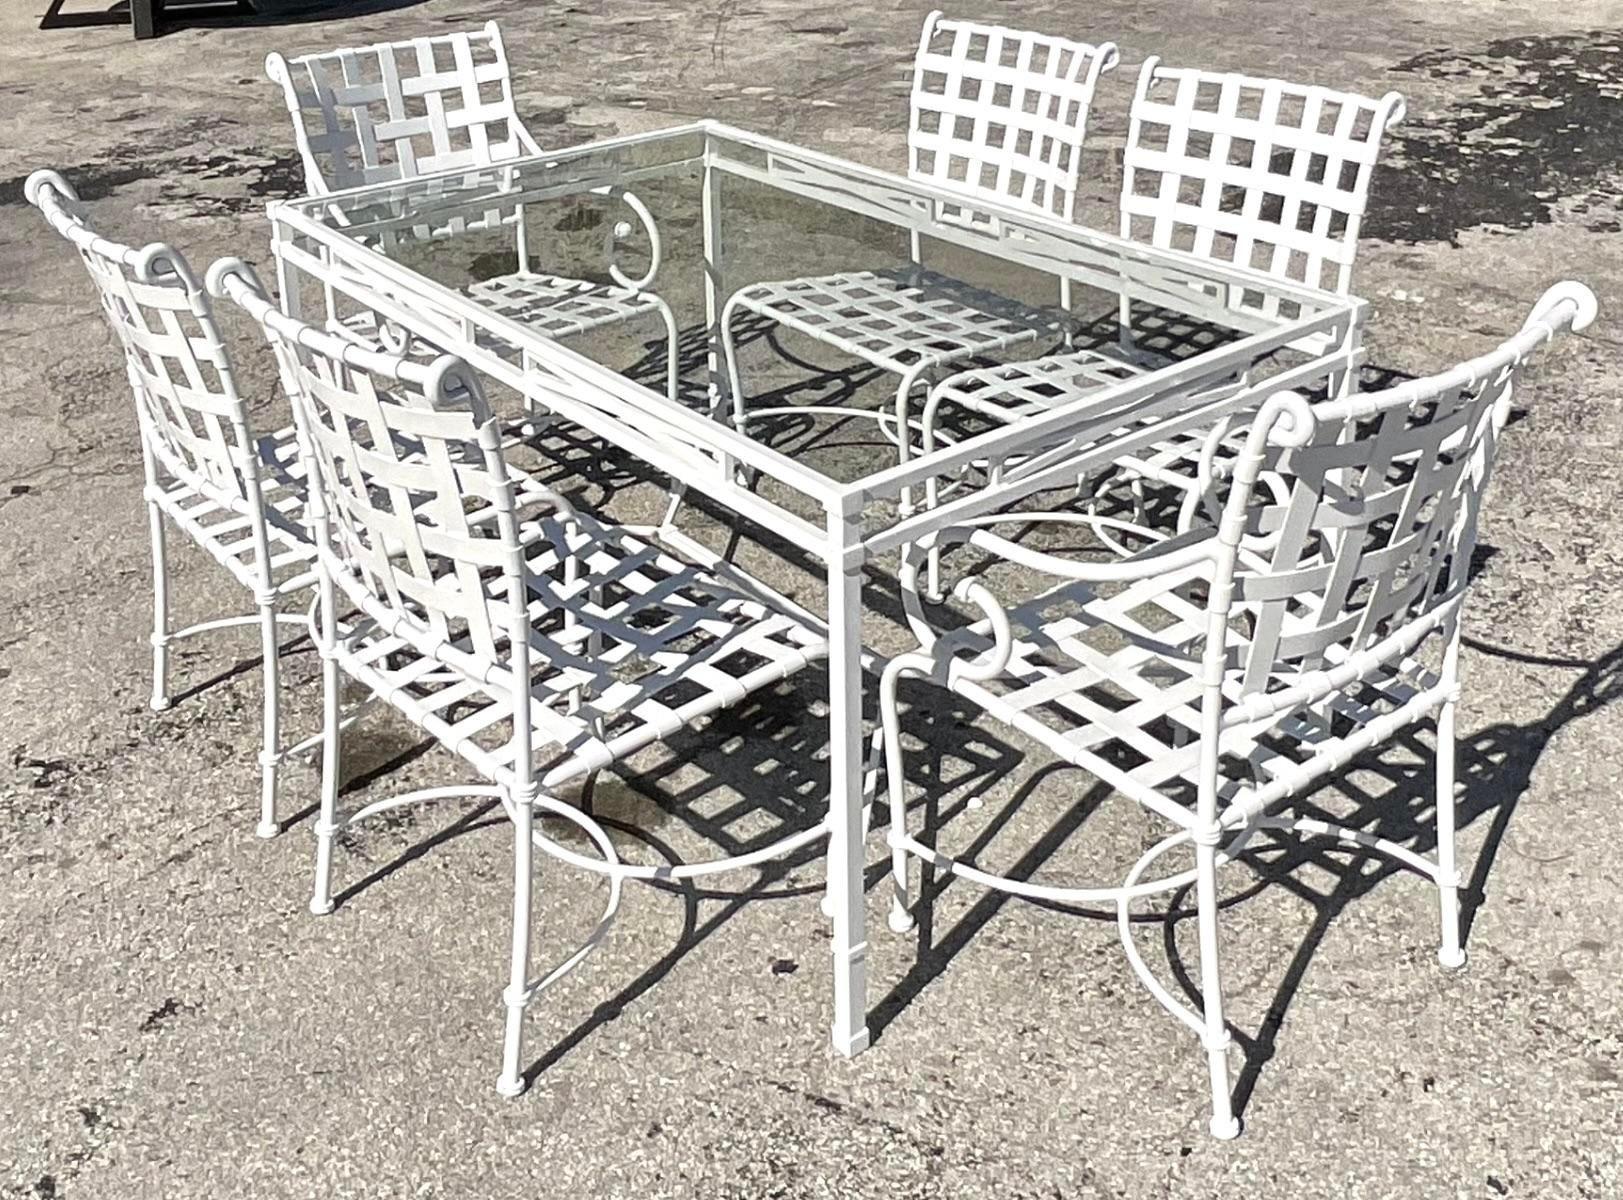 A fabulous vintage Coastal outdoor dining set. Made by the iconic Brown Jordan. The chairs are part of their Florentine collection and the table is from the Venetian collection. Fully restored with full sandblasting and powder coating in a high